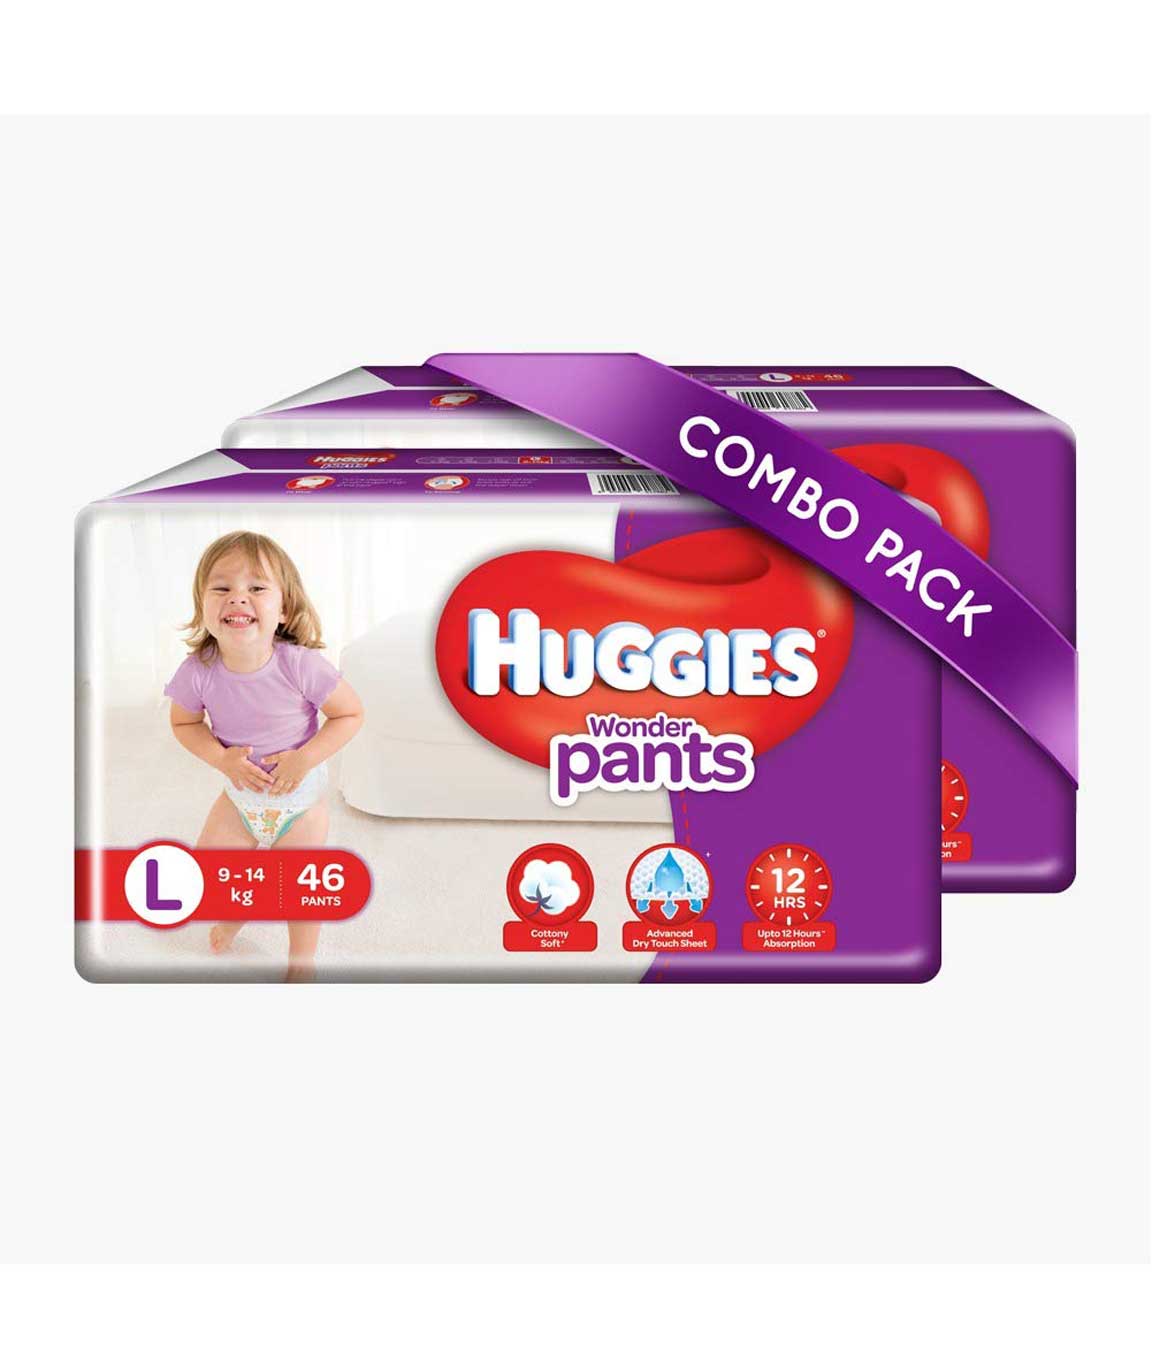 Buy Huggies Wonder Pants, Large Size Diapers, 16 Count Online at Low Prices  in India - Amazon.in